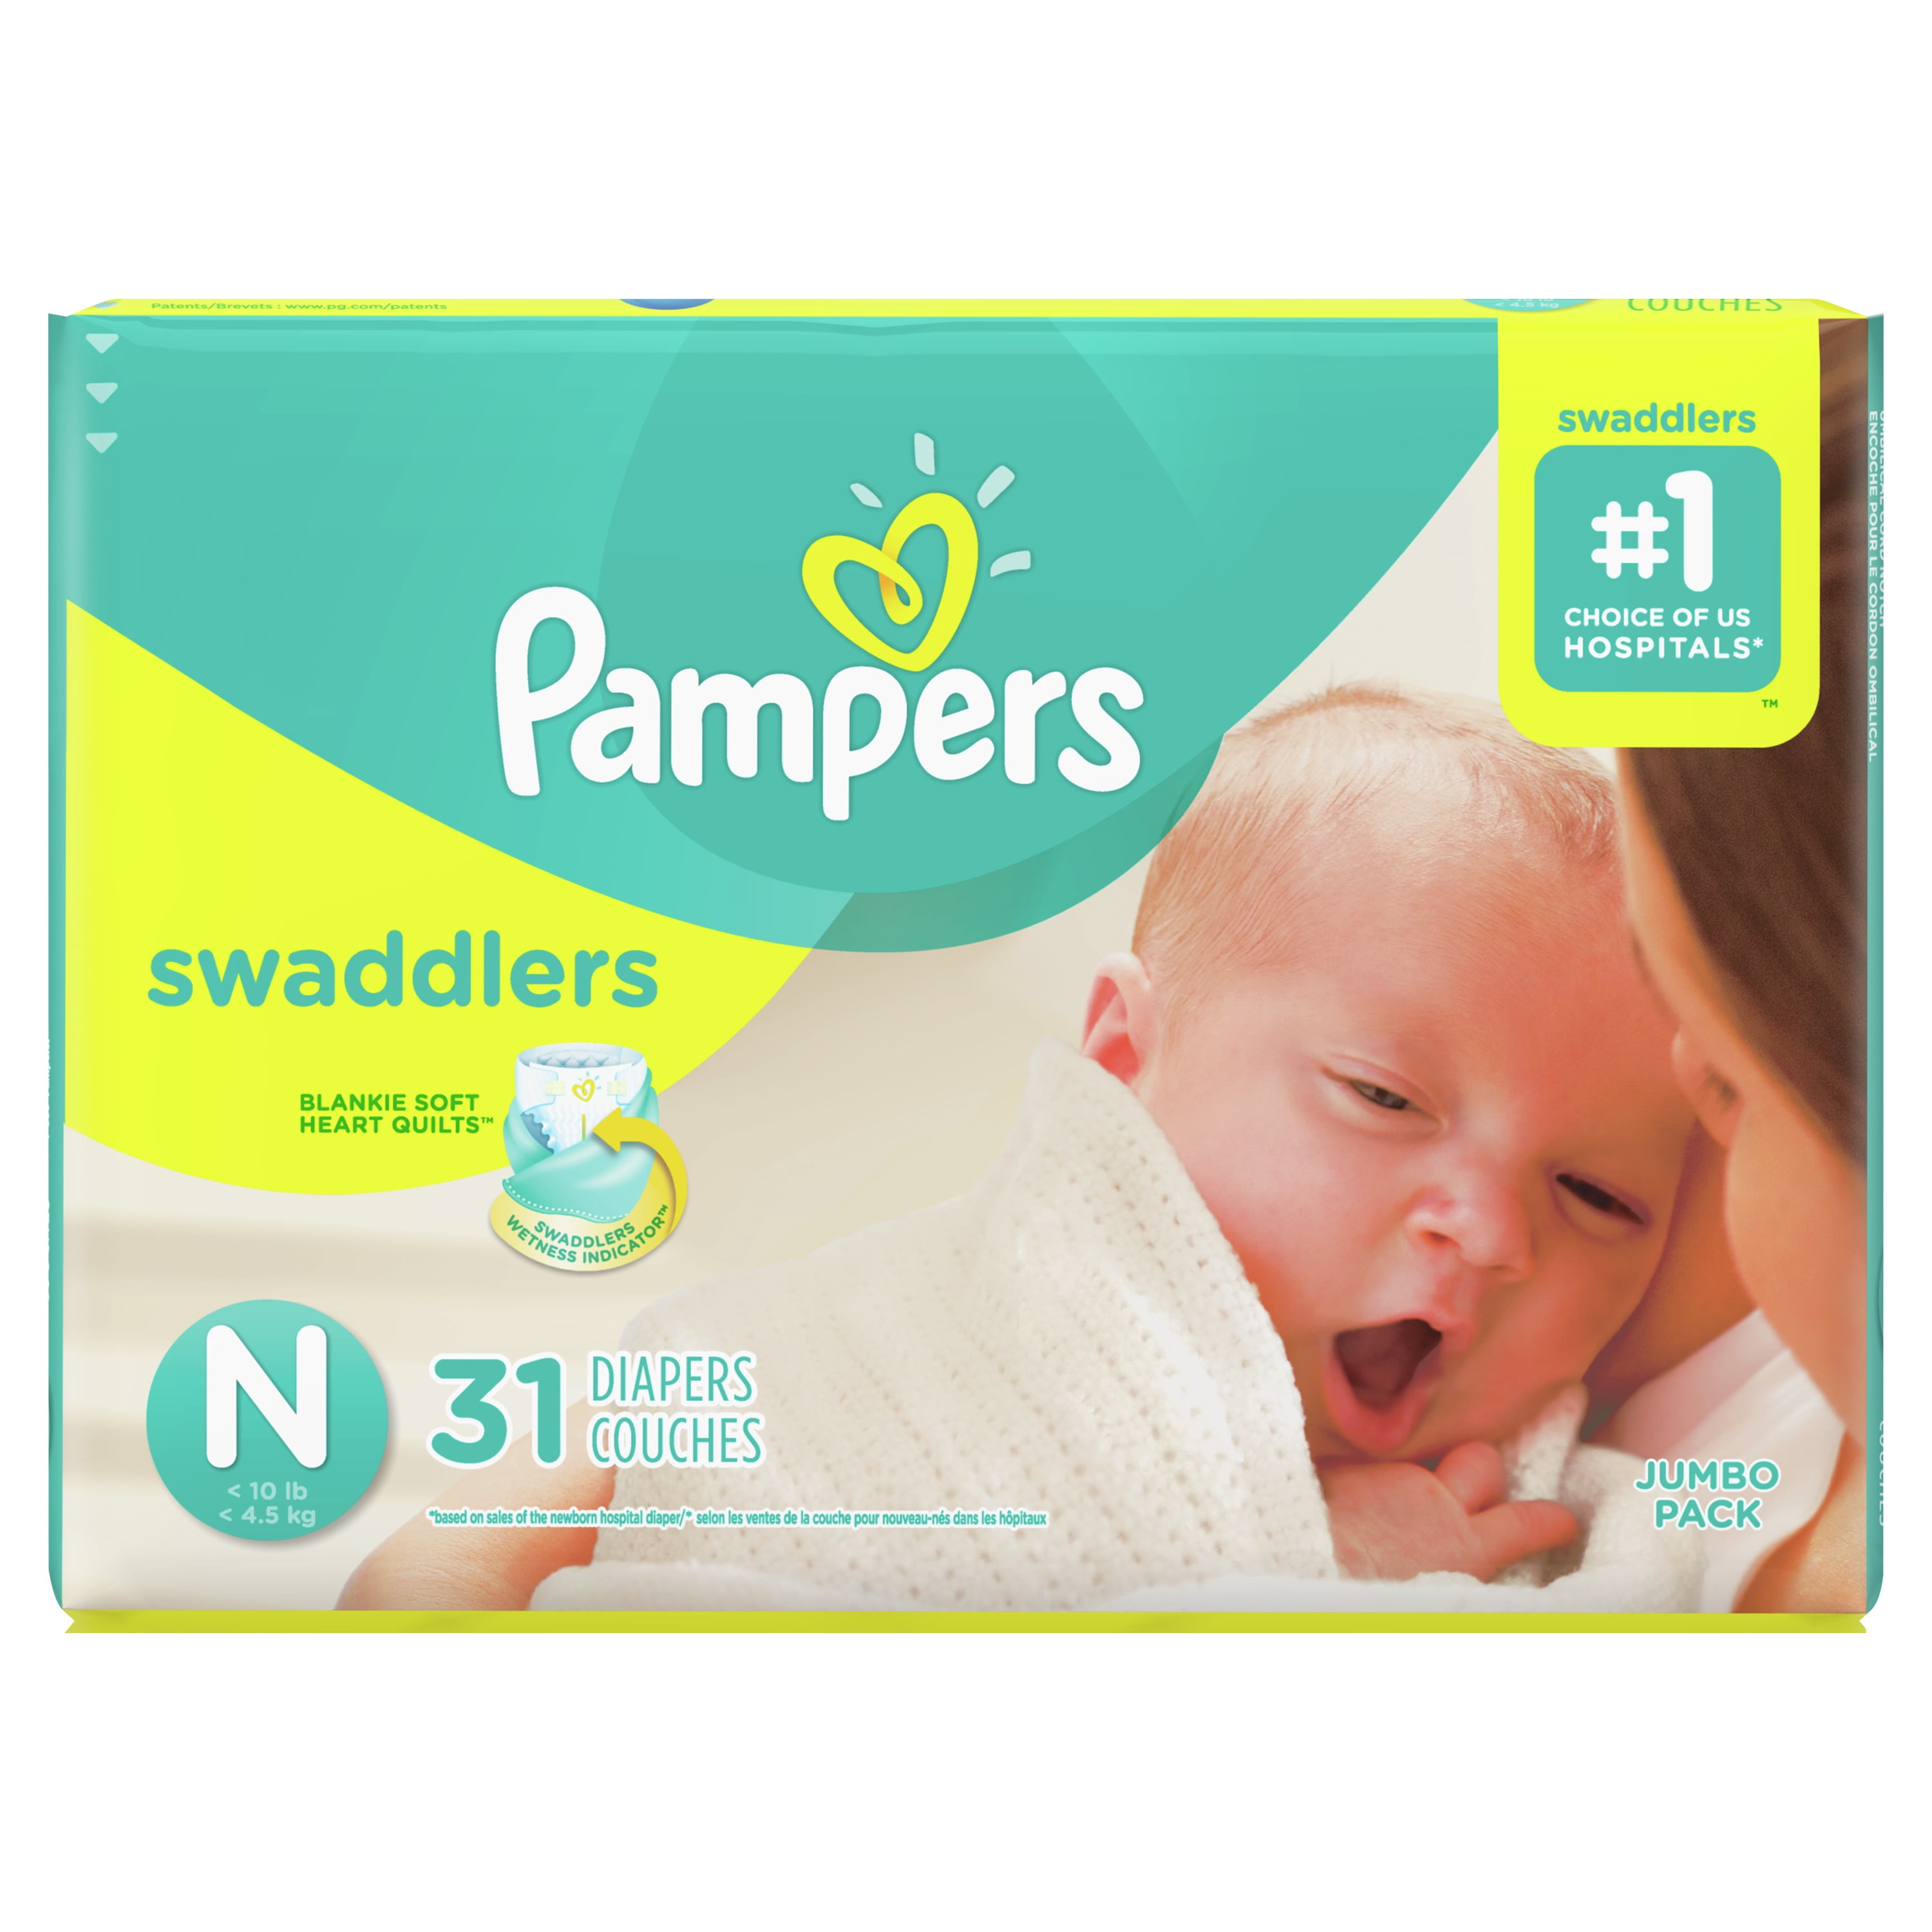 Pampers Swaddlers Newborn Diapers Size N 31 Count 